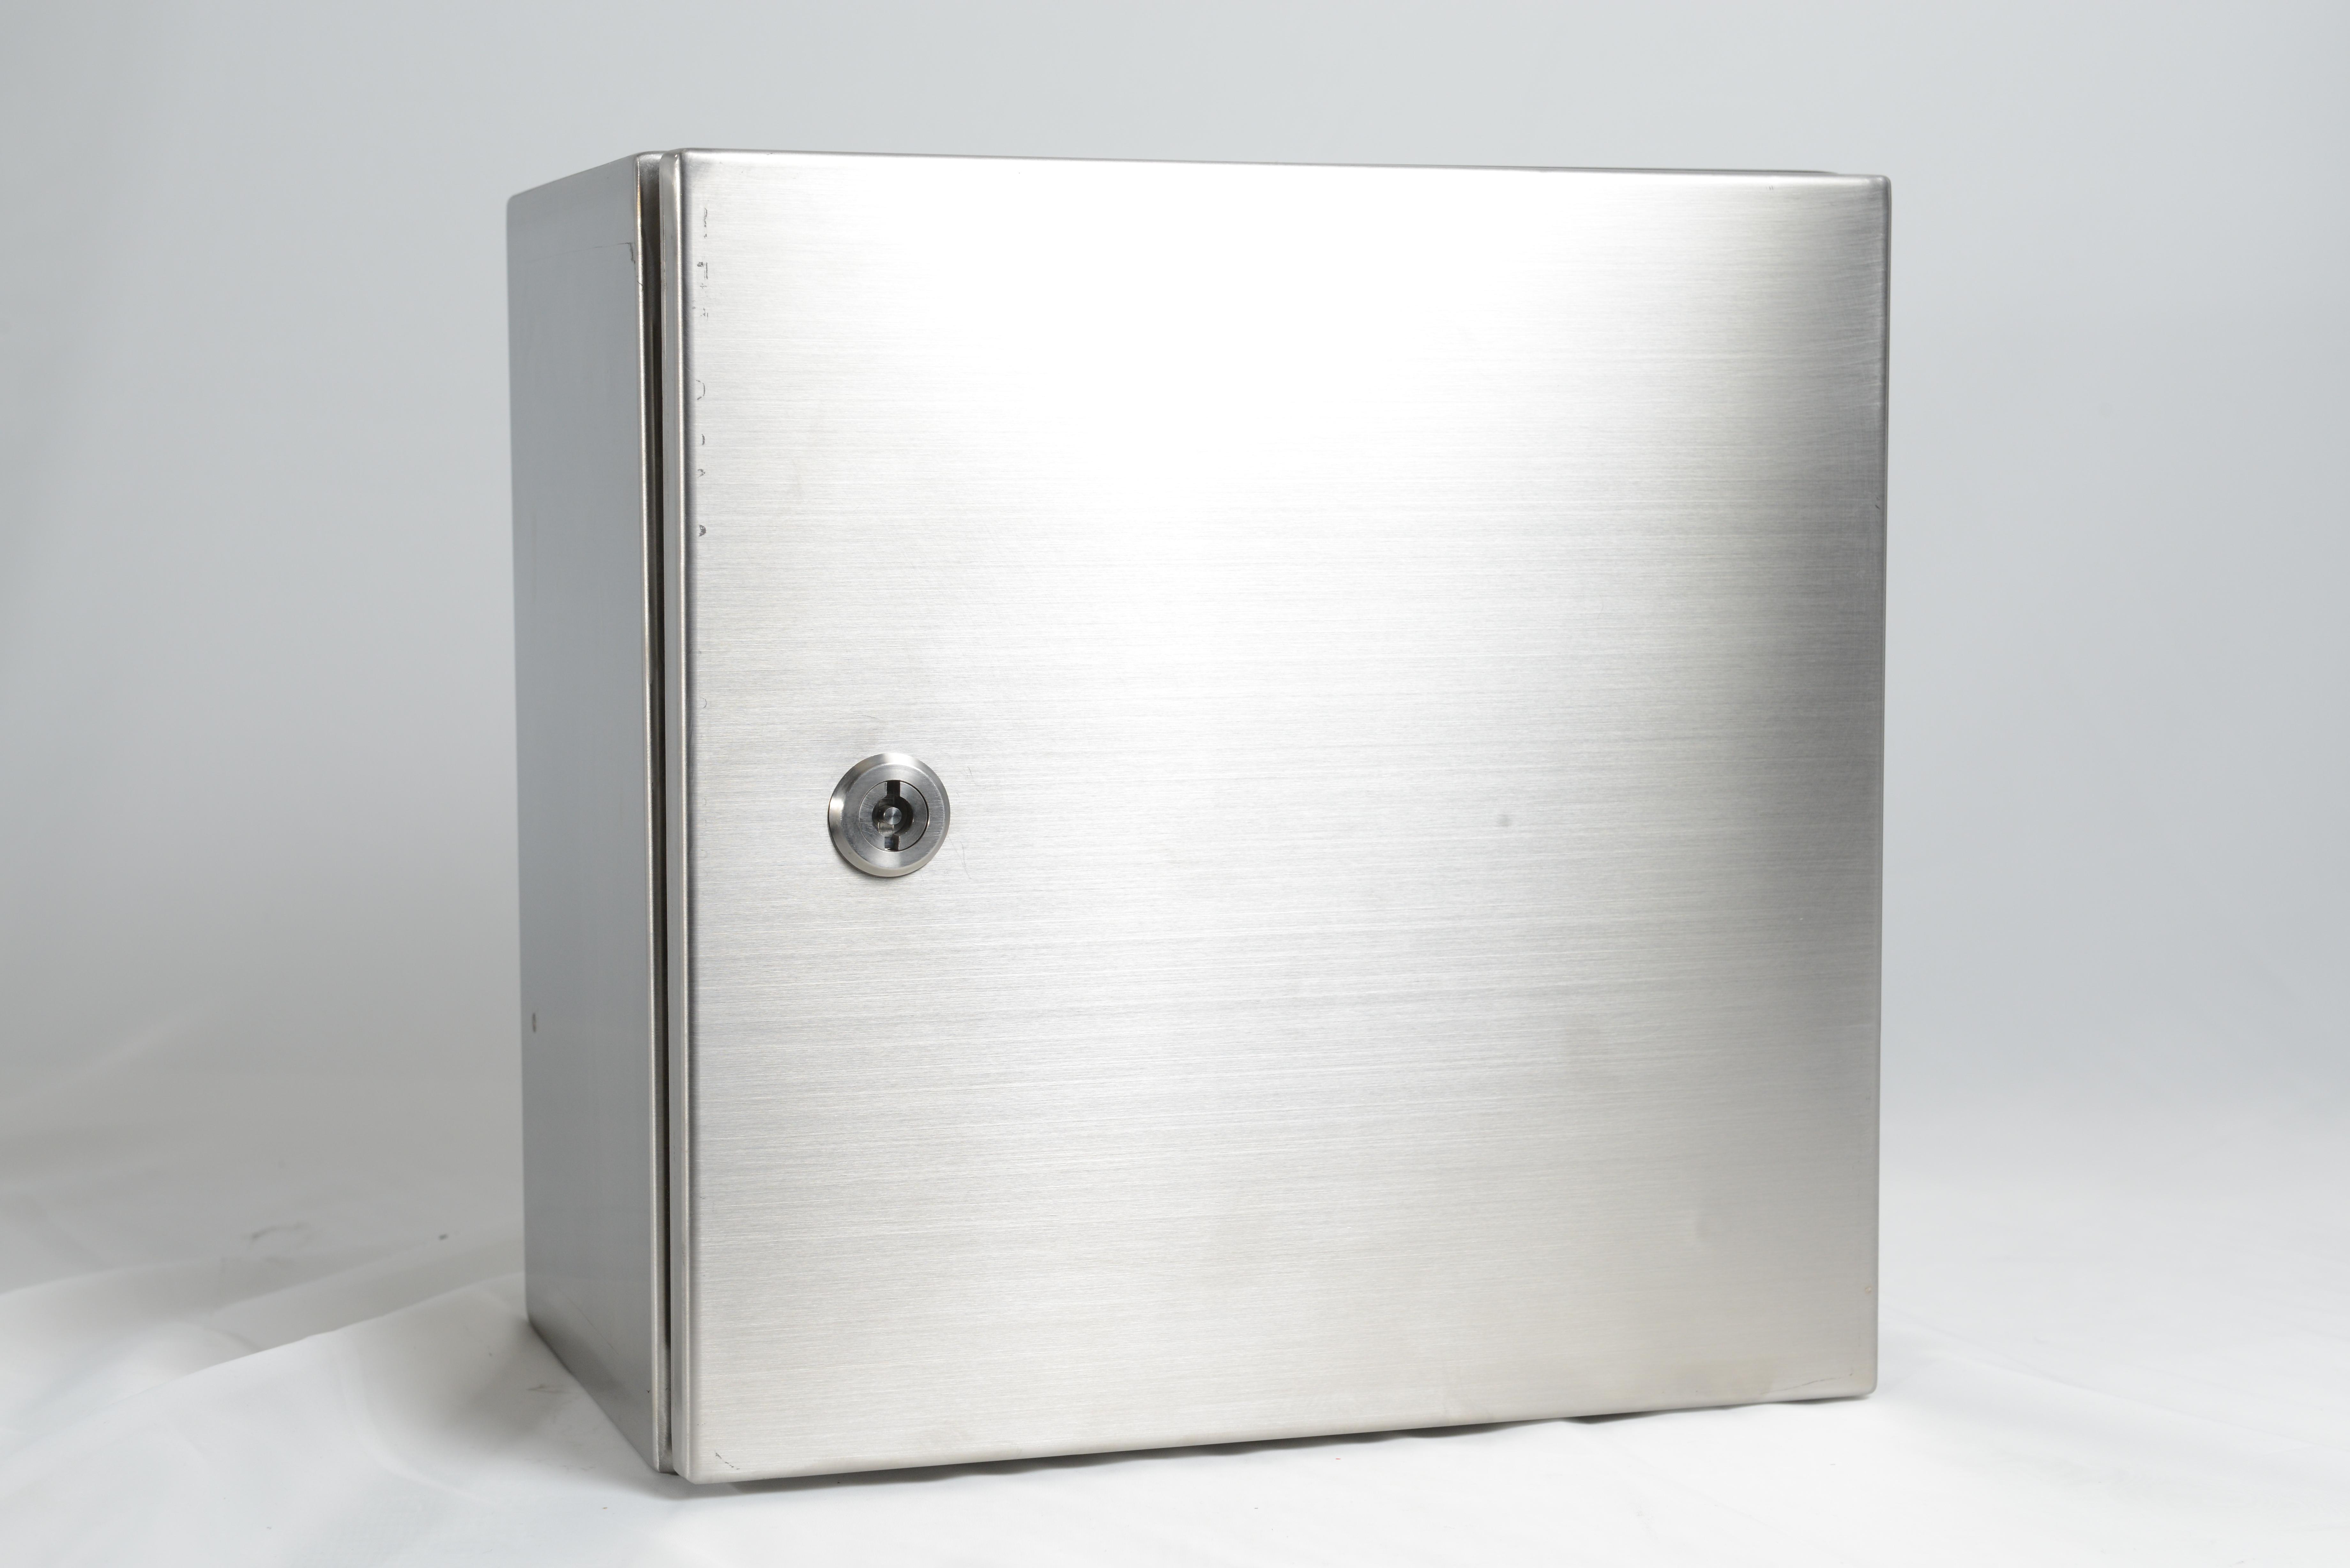 RCG stainless steel enclosure 316 grade 1000x1000x400mm - wall mounting